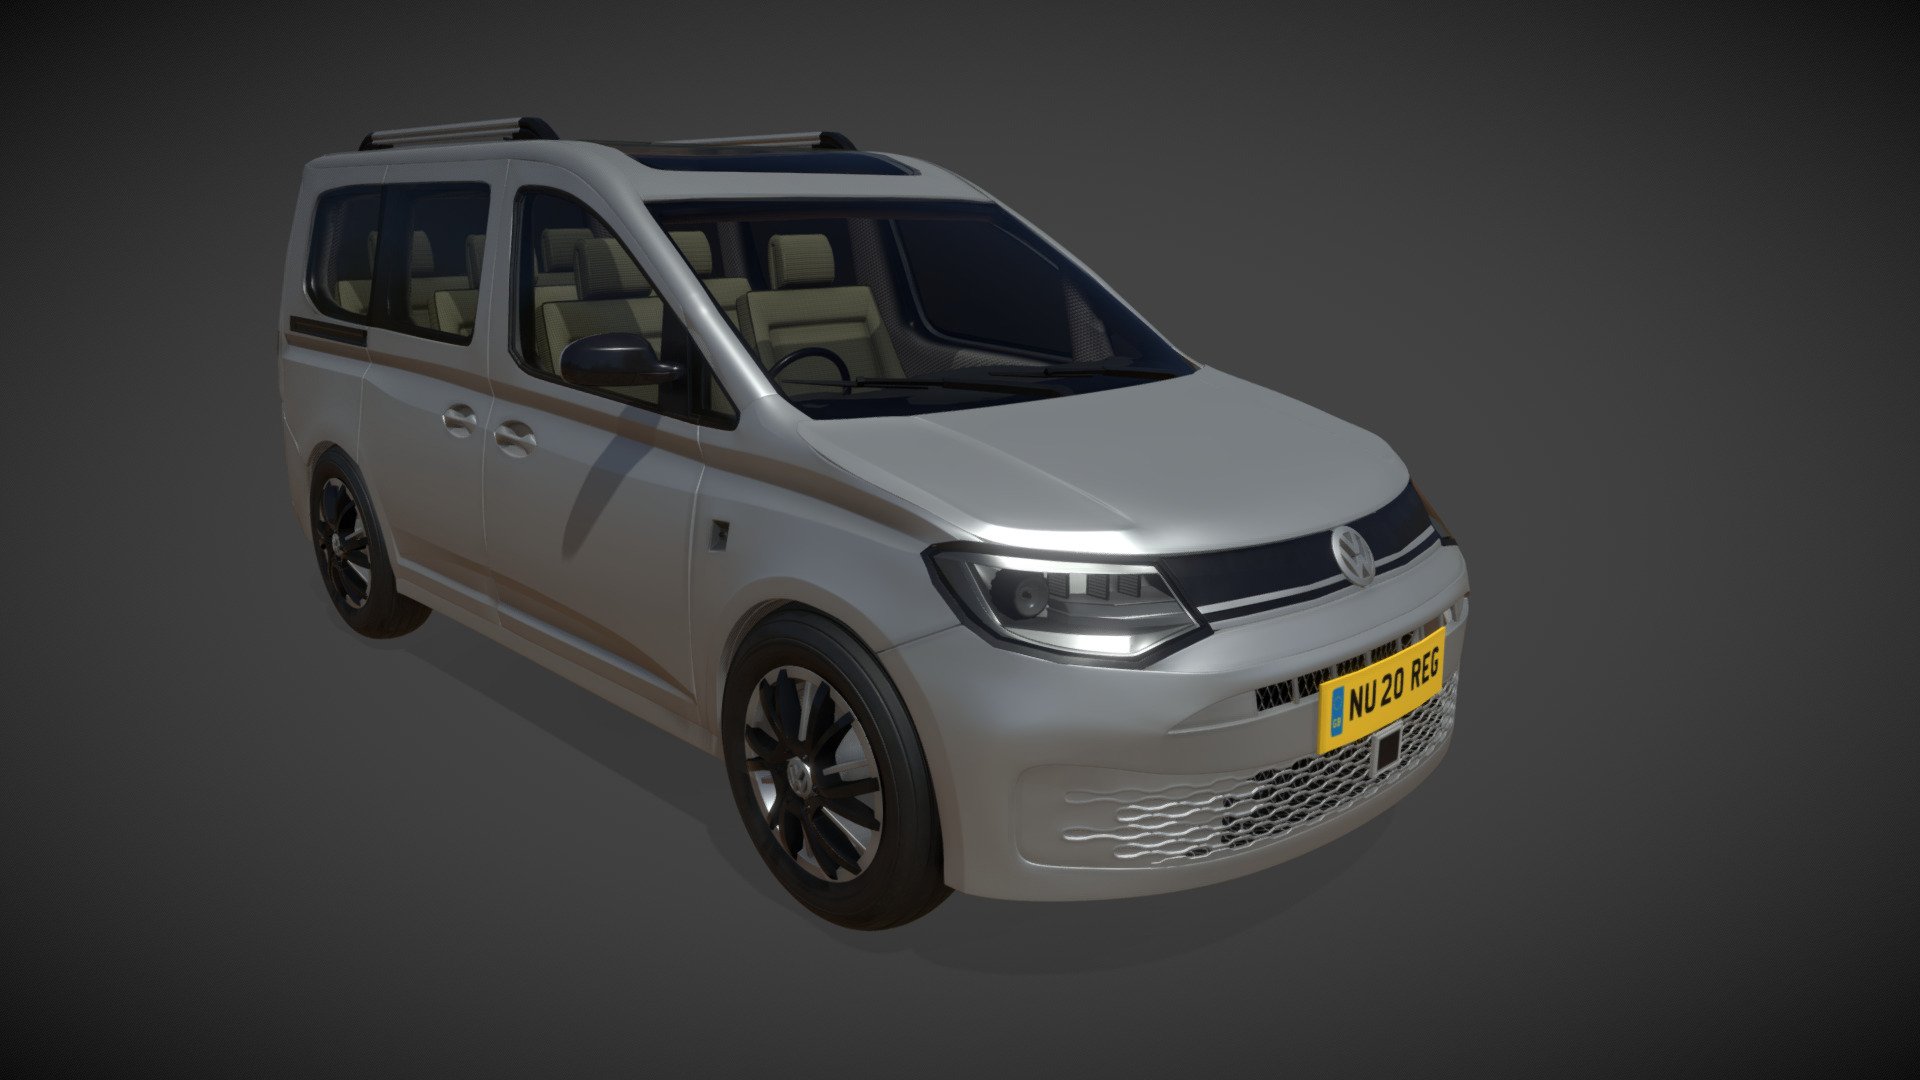 Volkswagen Transporter T6 high detailed 3D model
Modeled with Maya, Textured with Substance Painter, Rendered with Blender 3d model